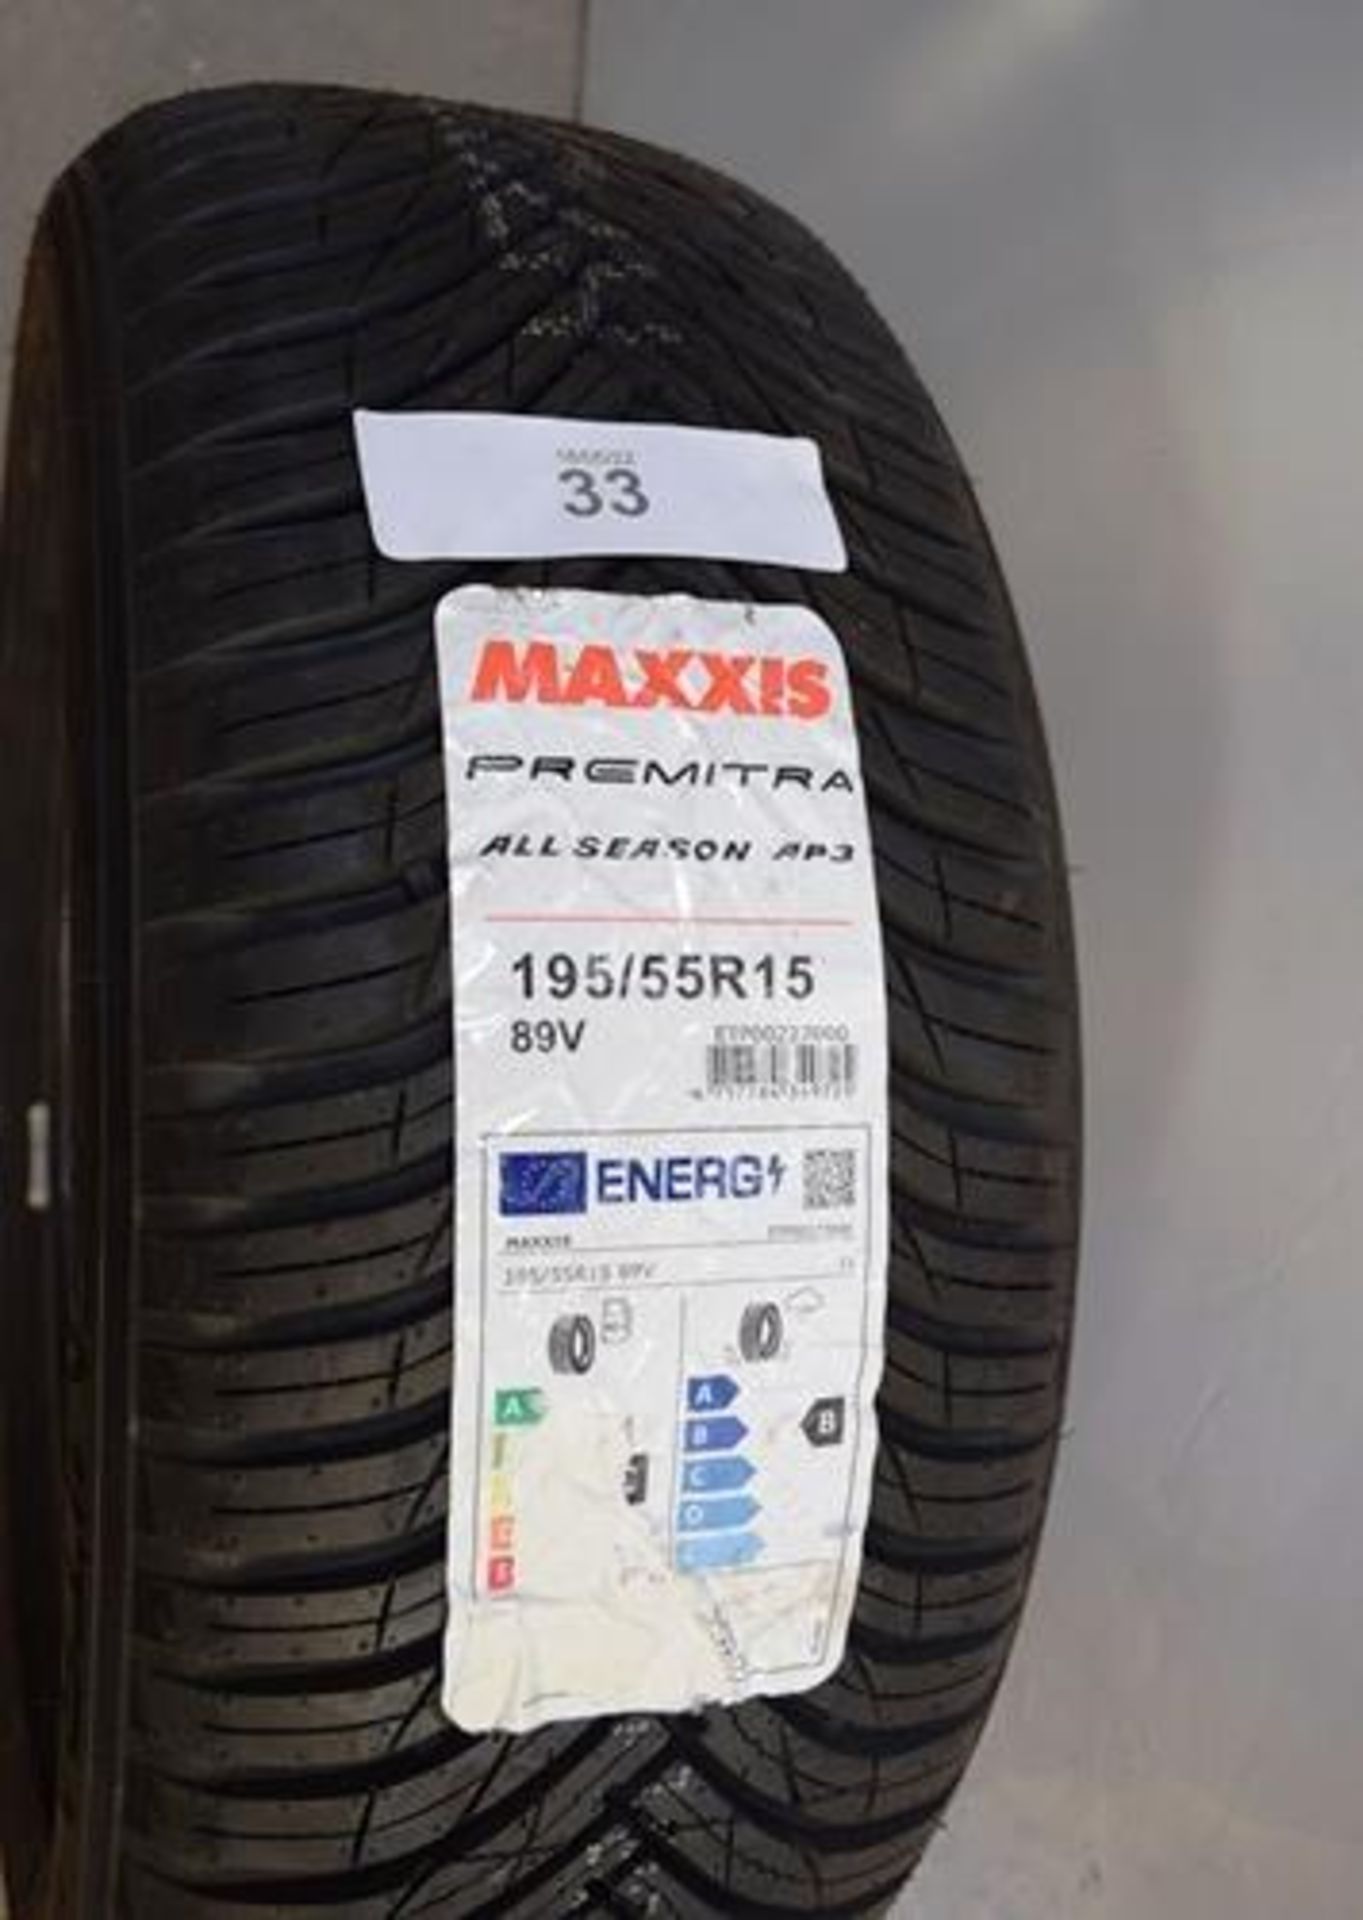 1 x Maxxis Premitra All Season AP3 tyre, size 195/55R15 89V - New with label (GS2) - Image 2 of 2